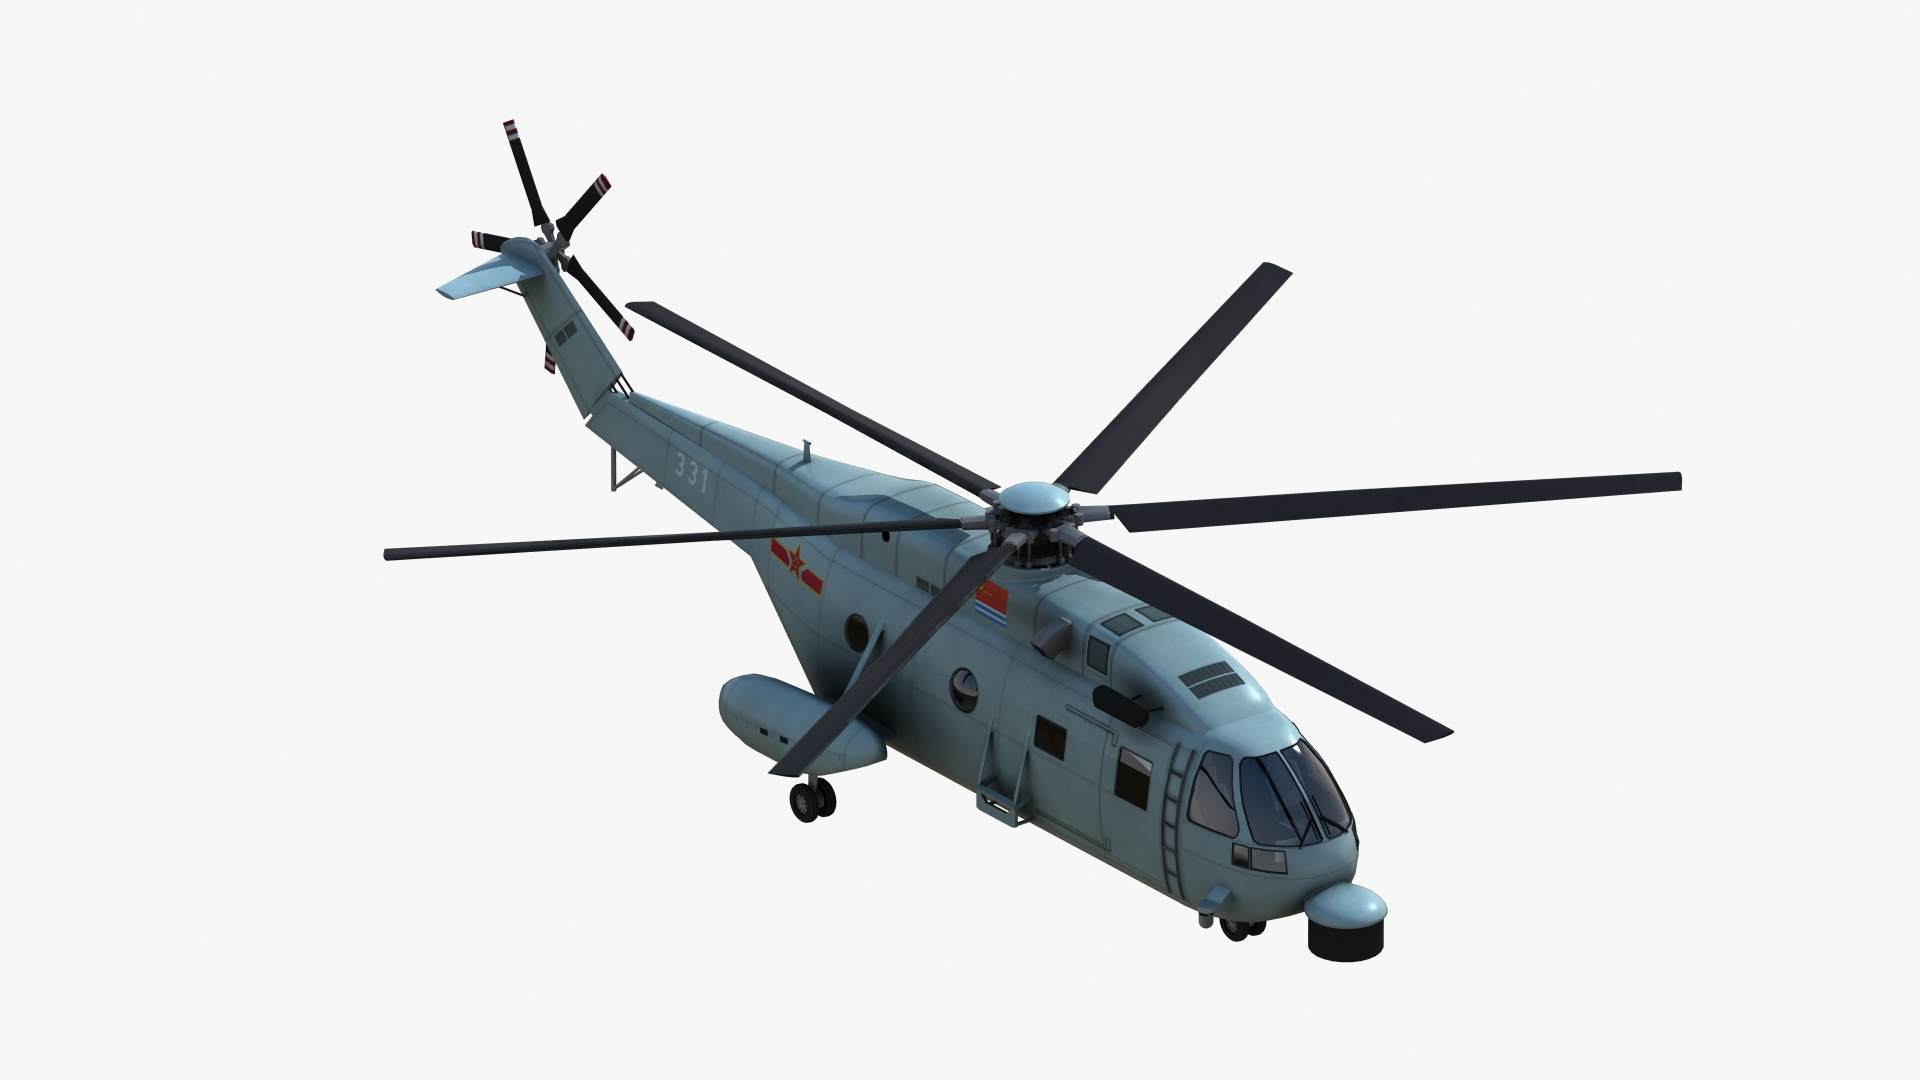 chinese military helicopters model https://p.turbosquid.com/ts-thumb/ui/KysFxp/OAn70Ic9/z18f_tt/jpg/1593255481/1920x1080/turn_fit_q99/665988f6ff9d673879137412a03e478281b8ab69/z18f_tt-1.jpg